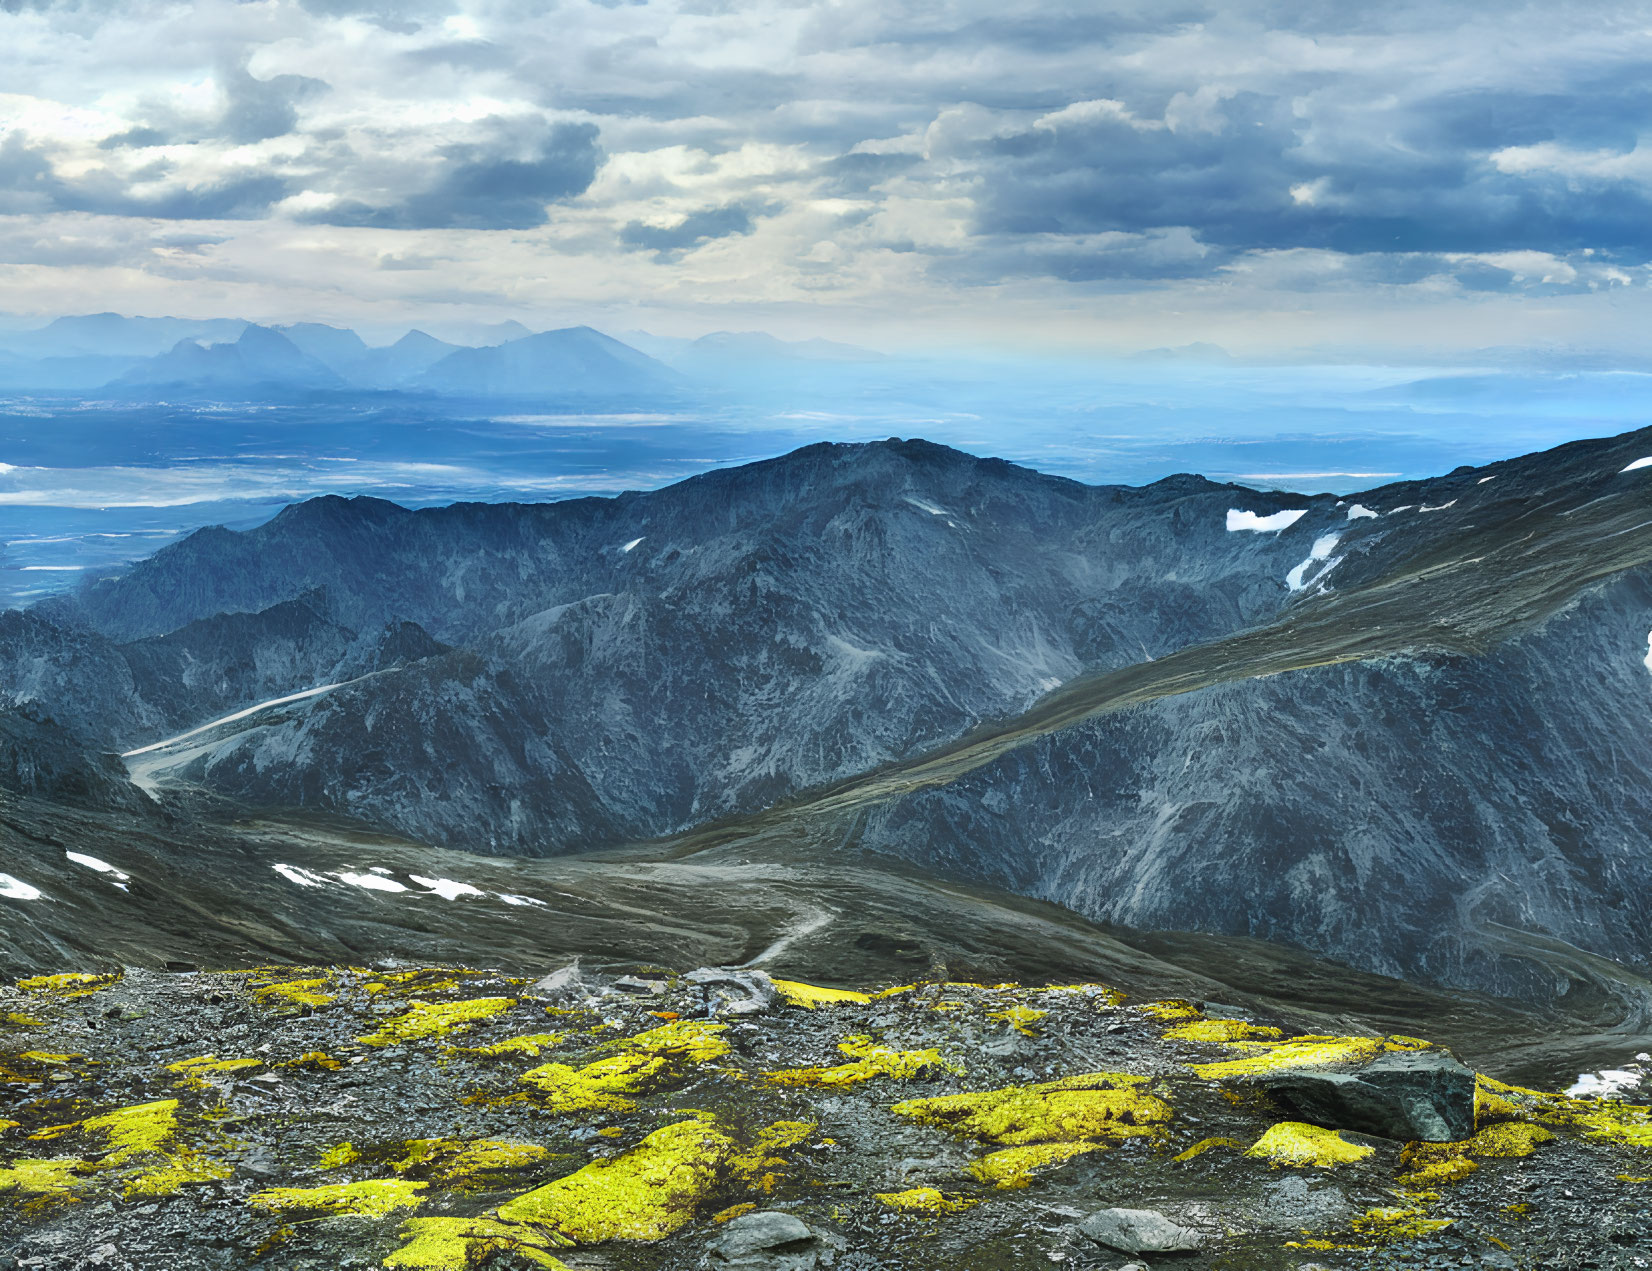 Rocky Mountain Peaks with Snow Patches and Vibrant Yellow Lichen